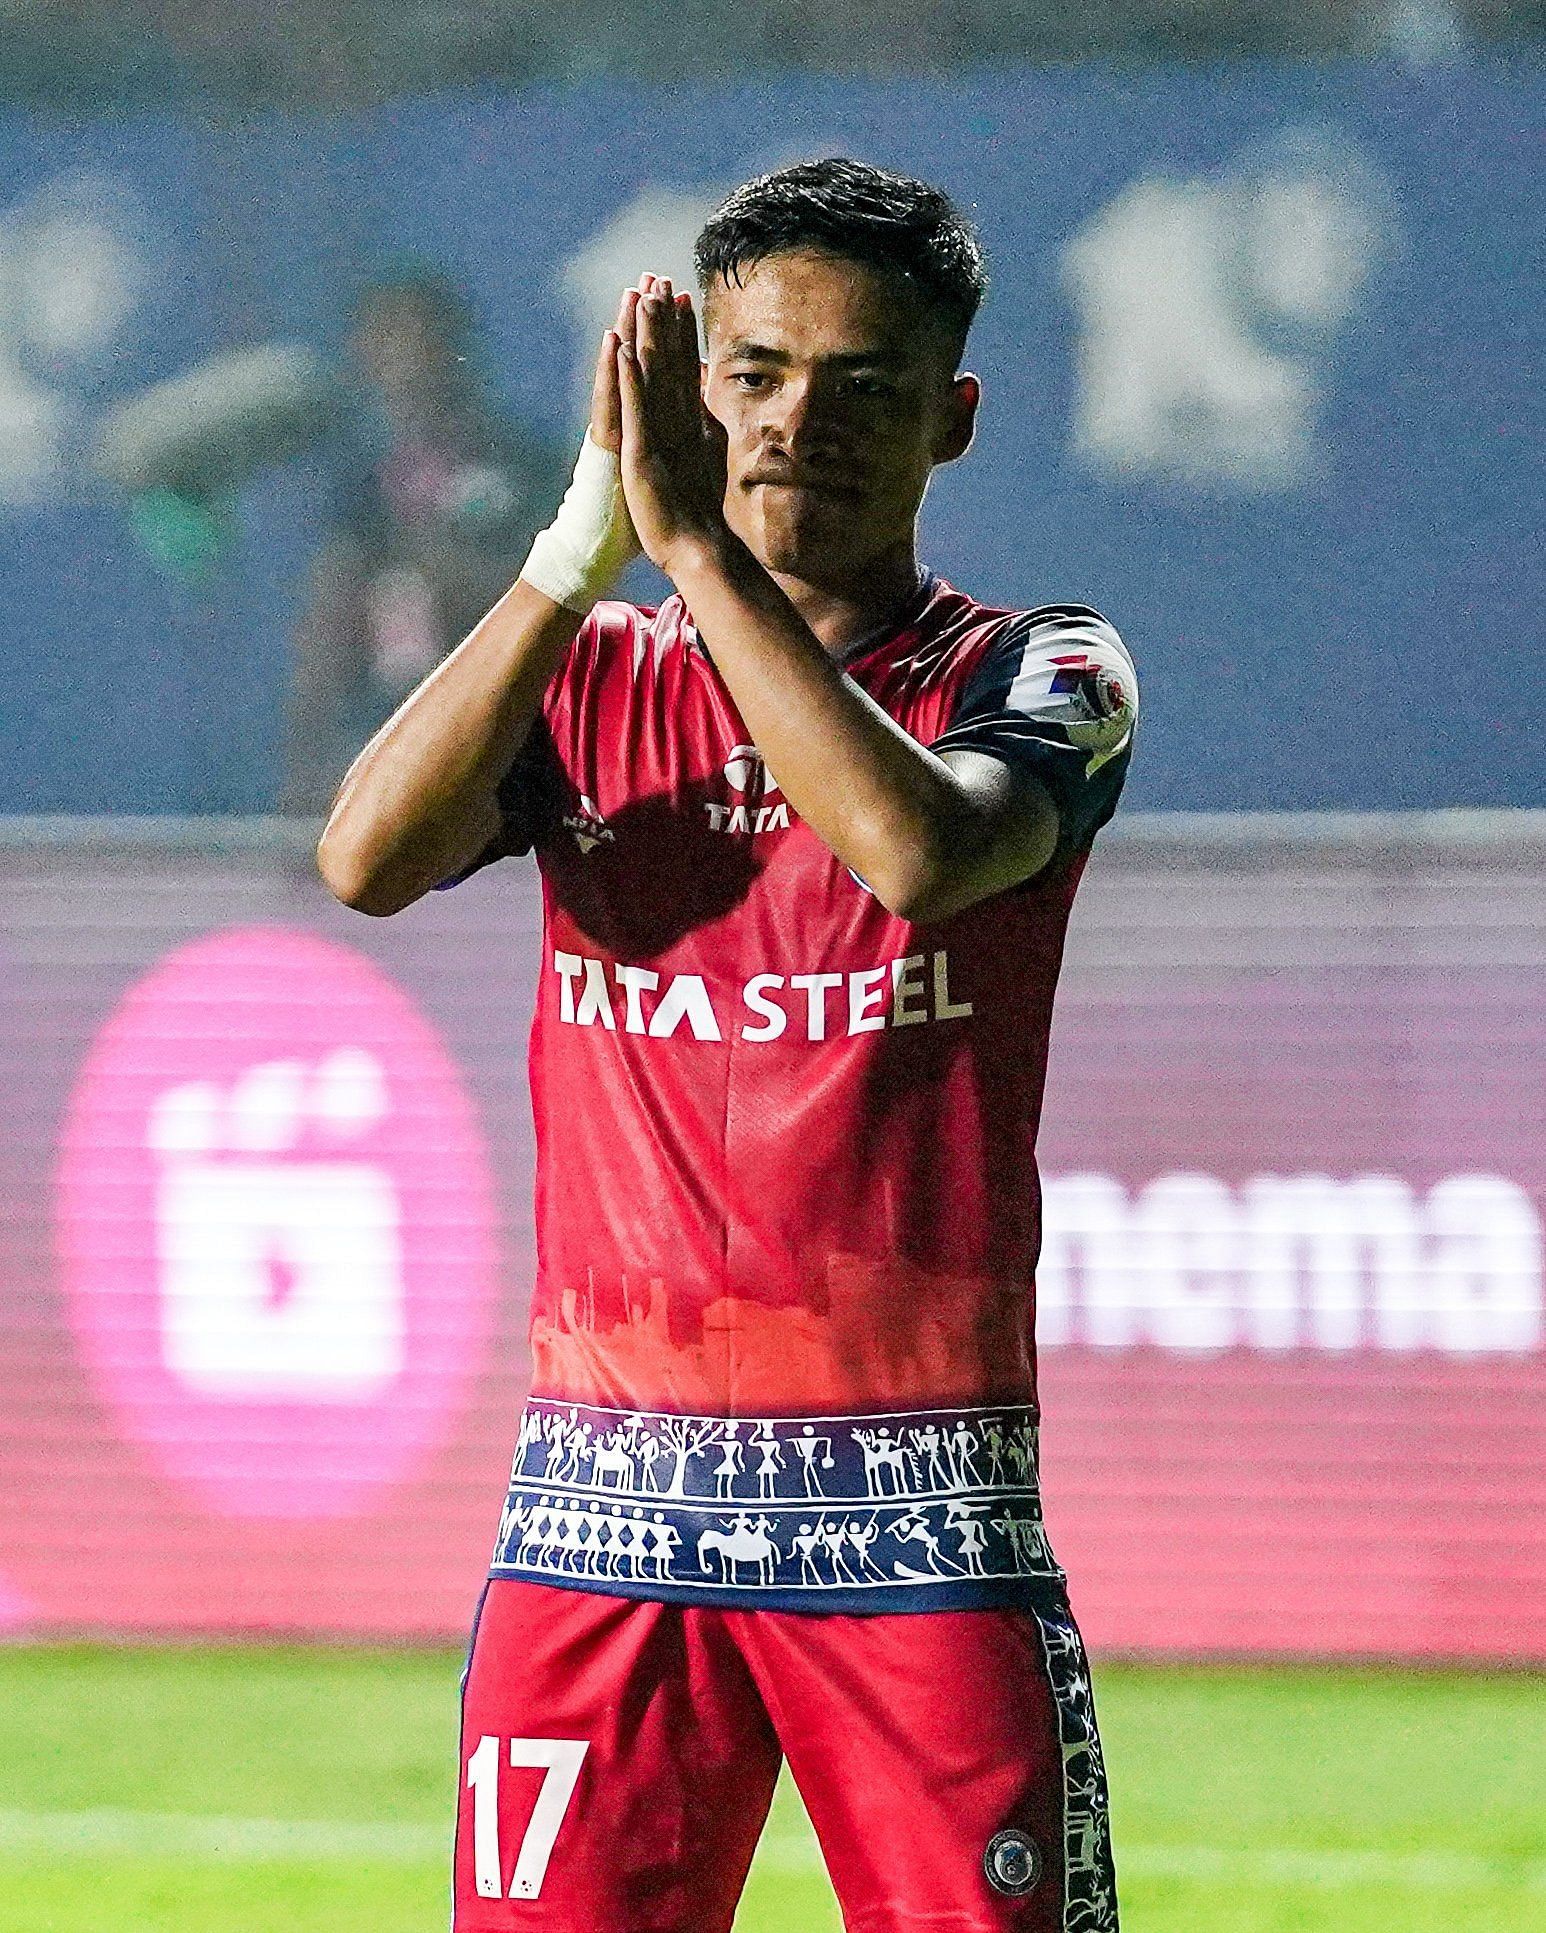 Imran has scored goals in consecutive matches for Jamshedpur this season. (JFC Media)